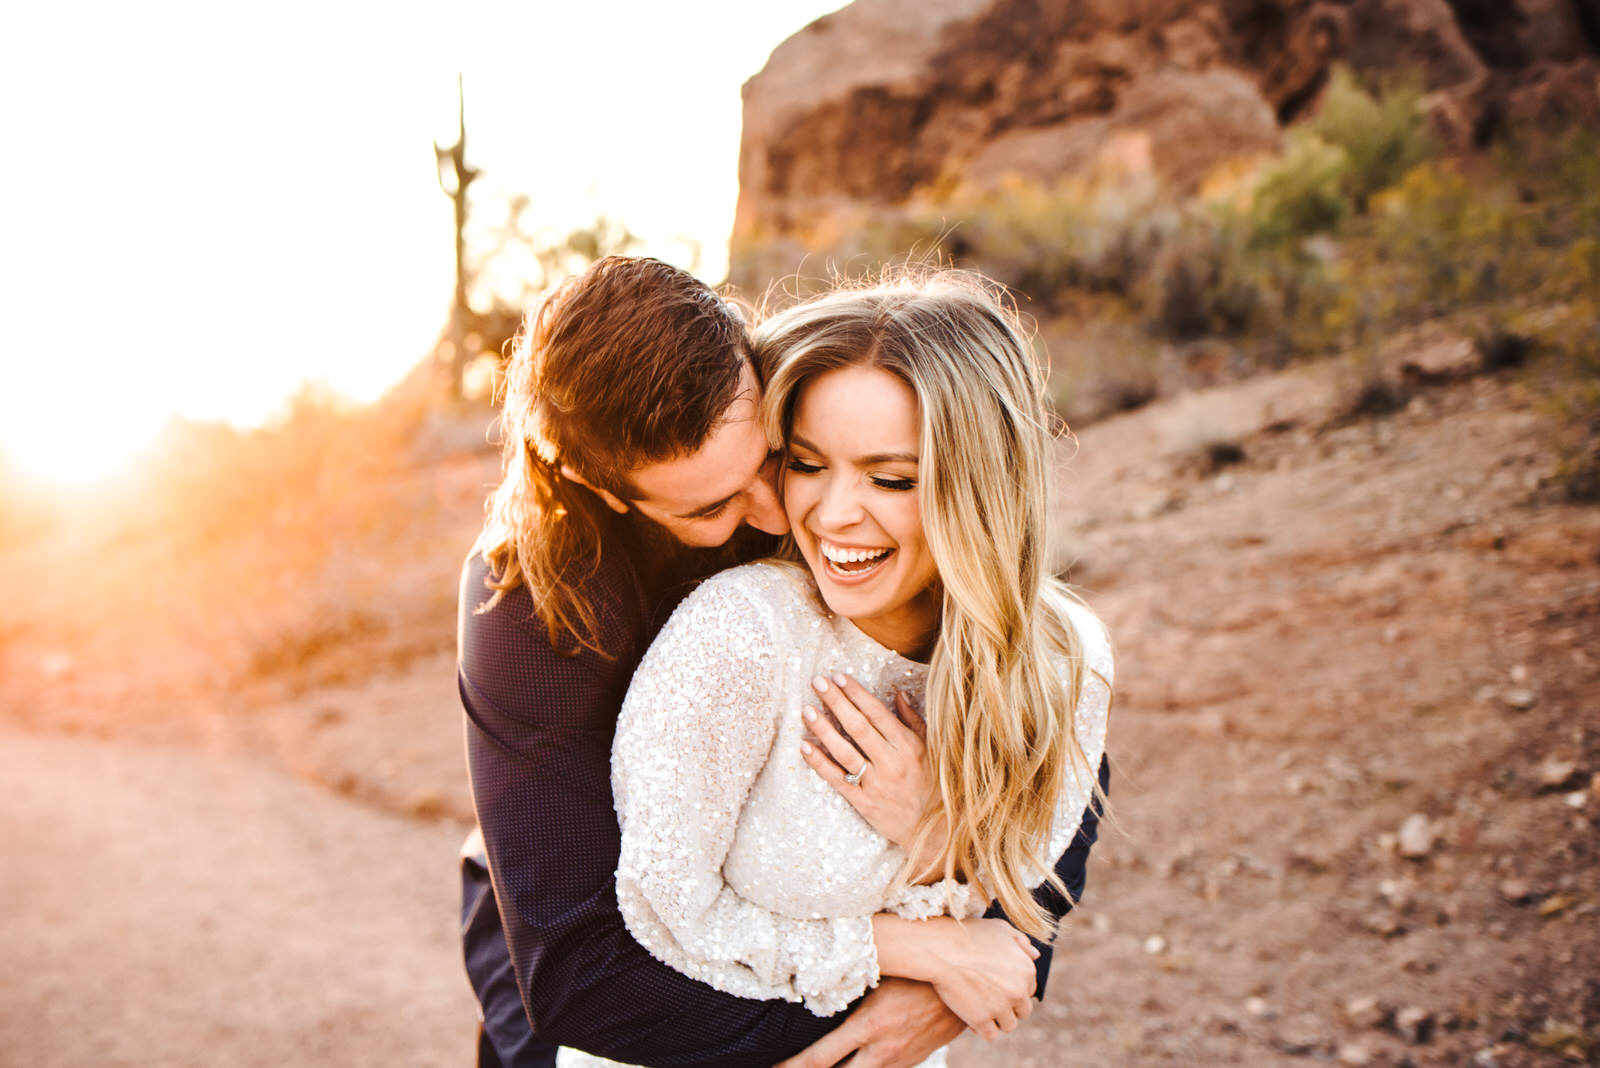 8 Tips for getting AMAZING Engagement Photos you love!